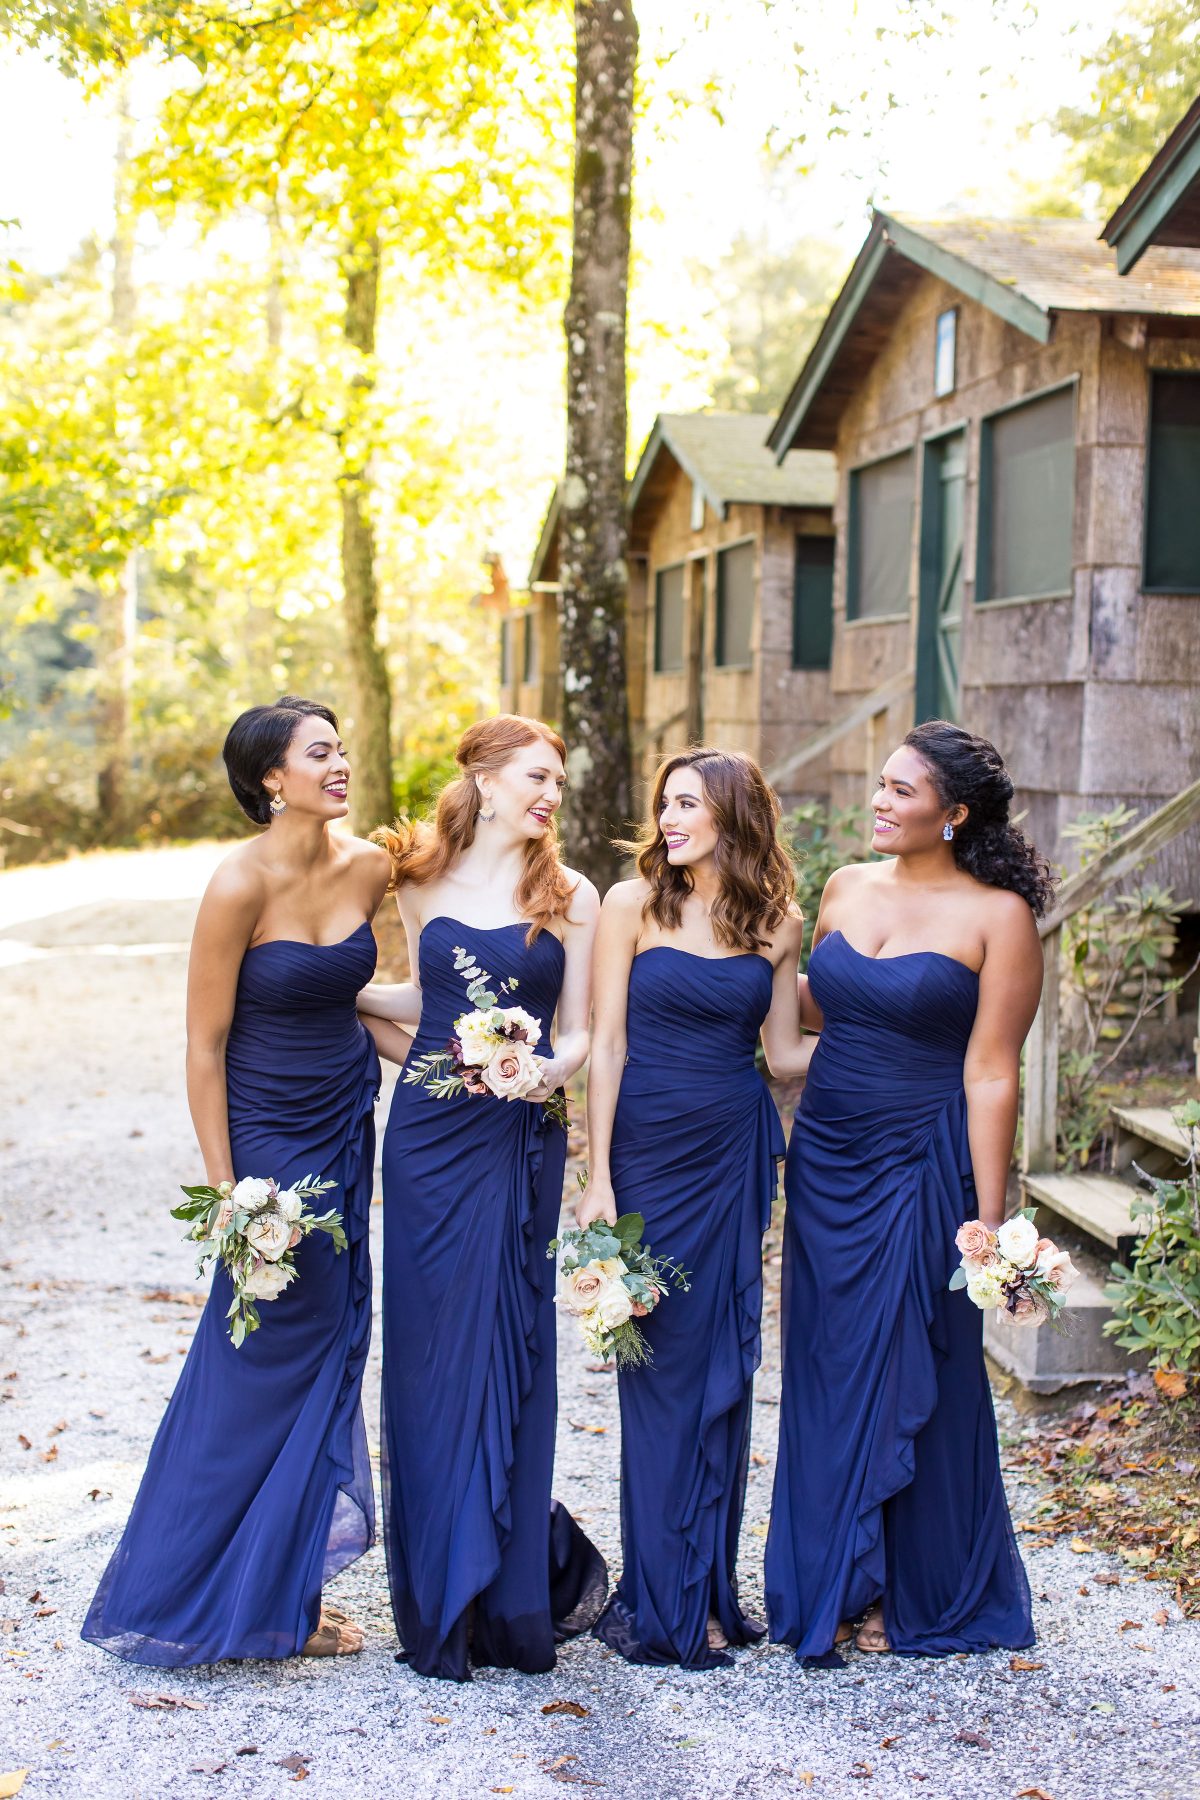 How to Make Your Bridesmaids Feel Unique in the Same Look | Kleinfeld ...